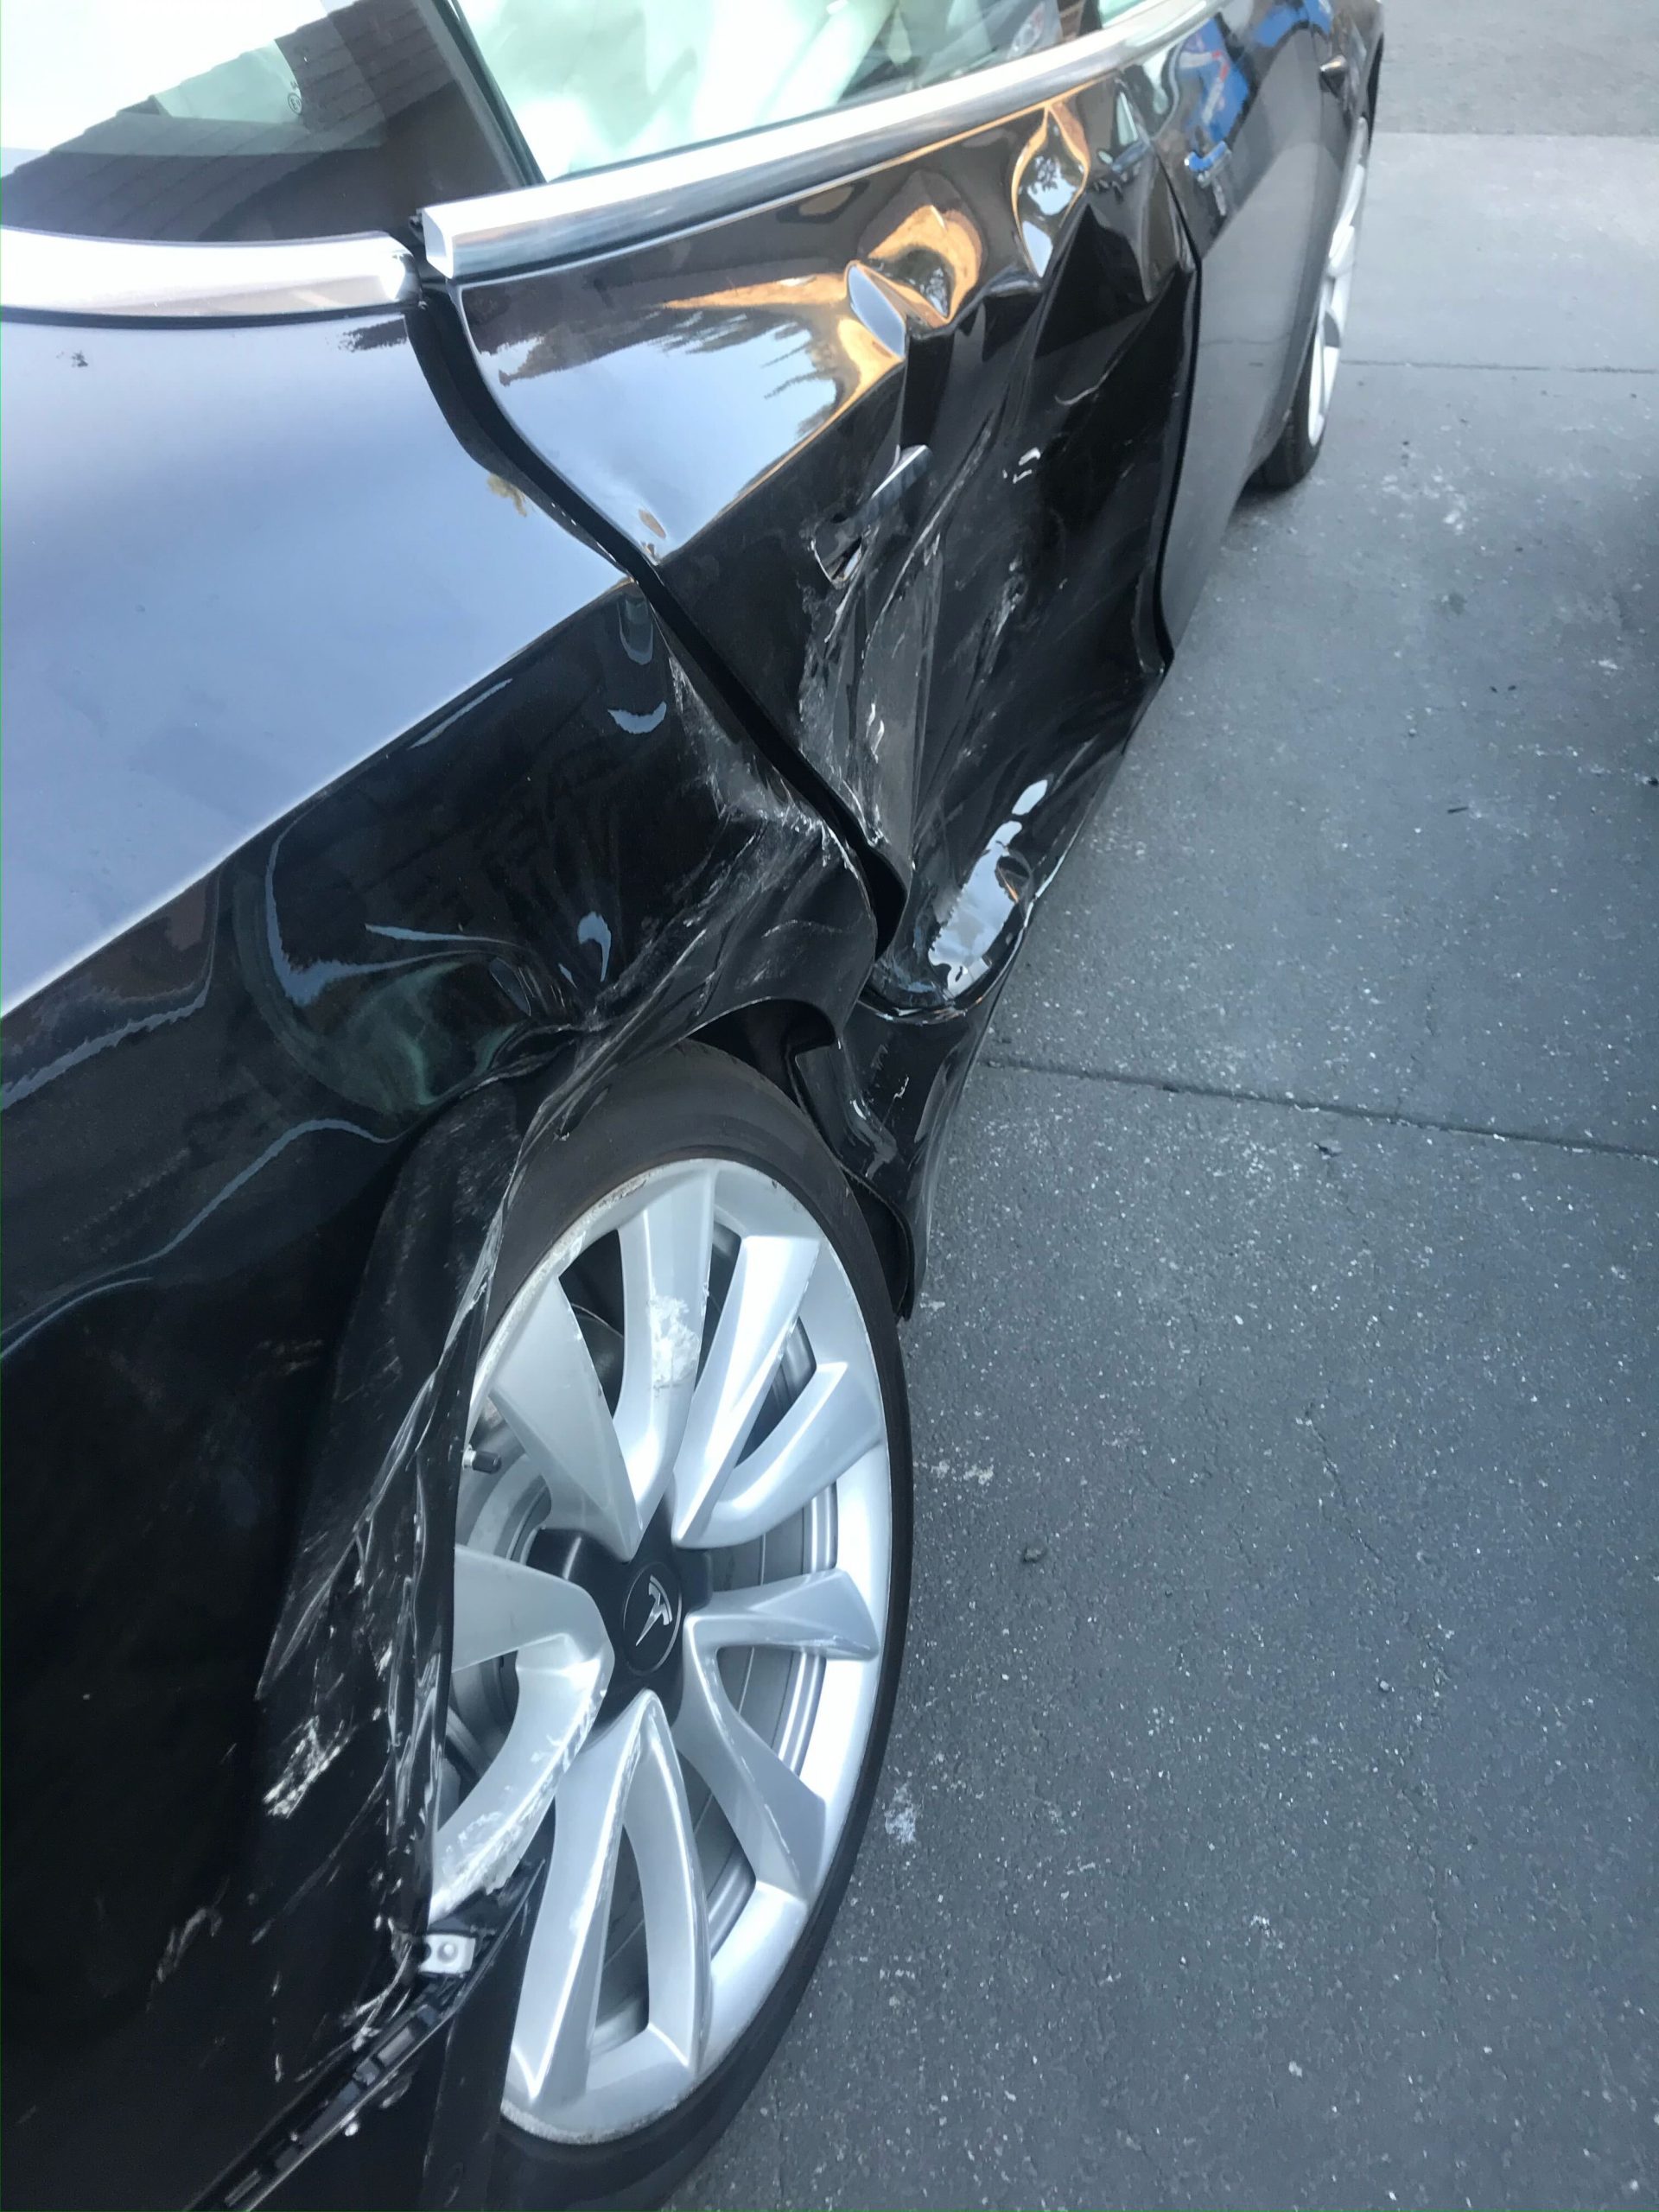 My Tesla saved our lives 1